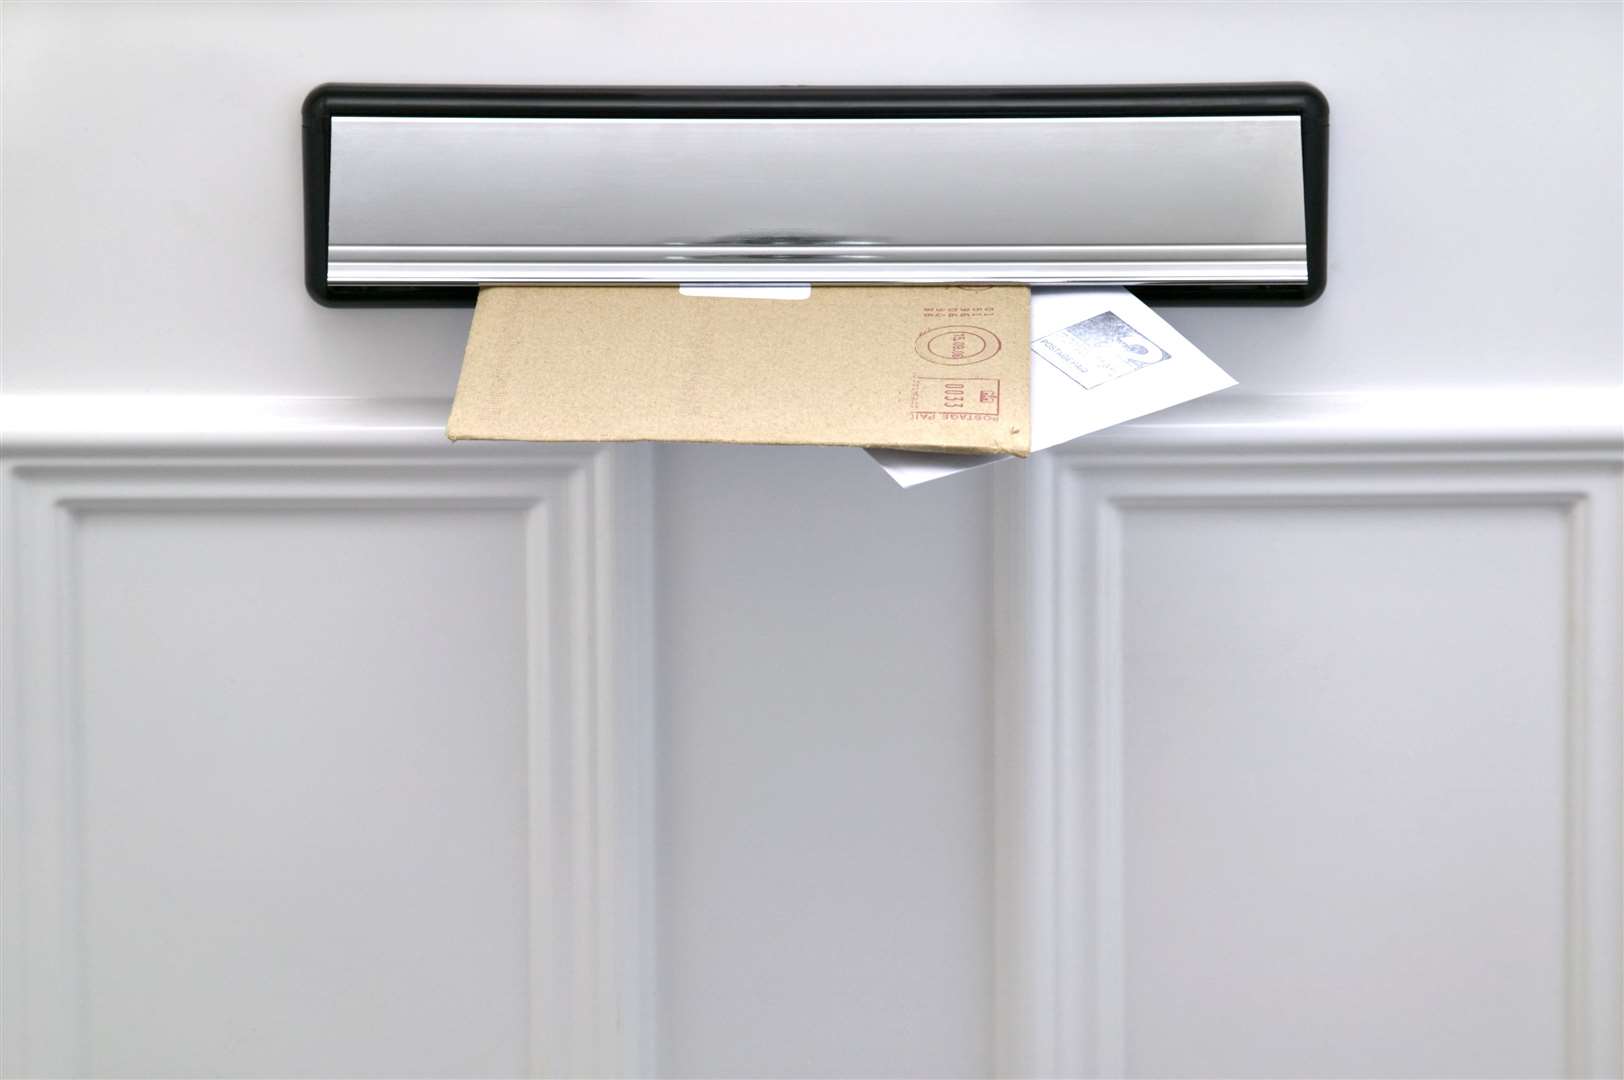 What will be coming through your letterbox?